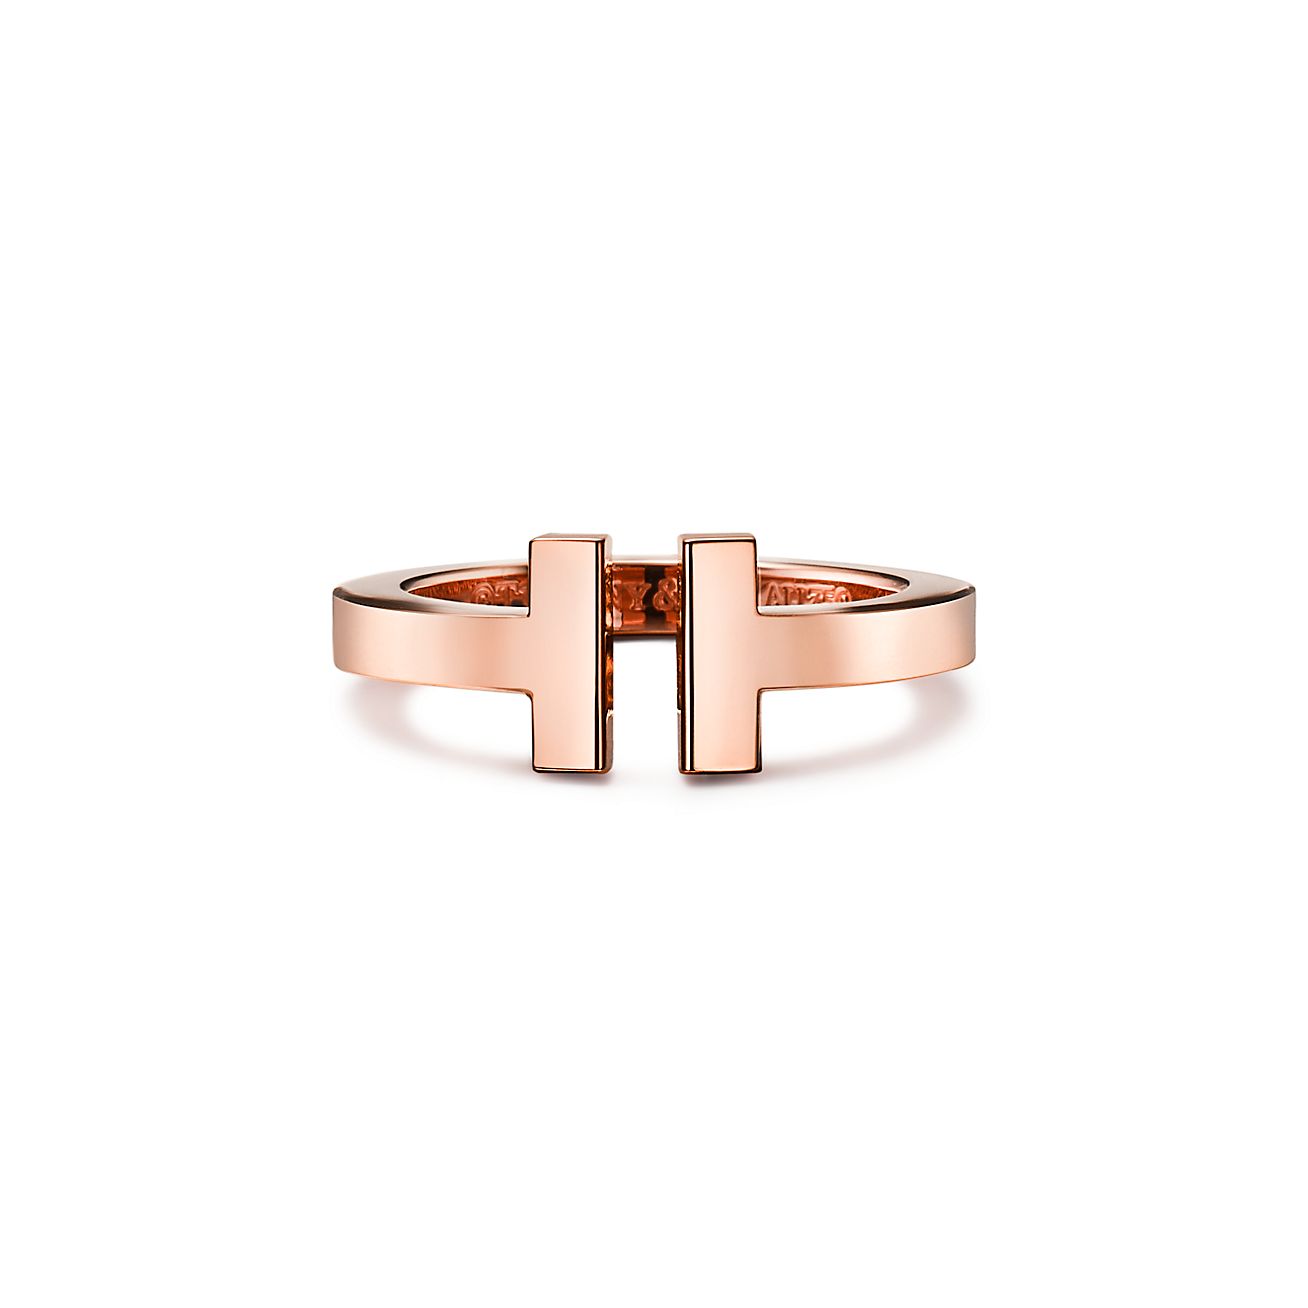 tiffany and co rings rose gold